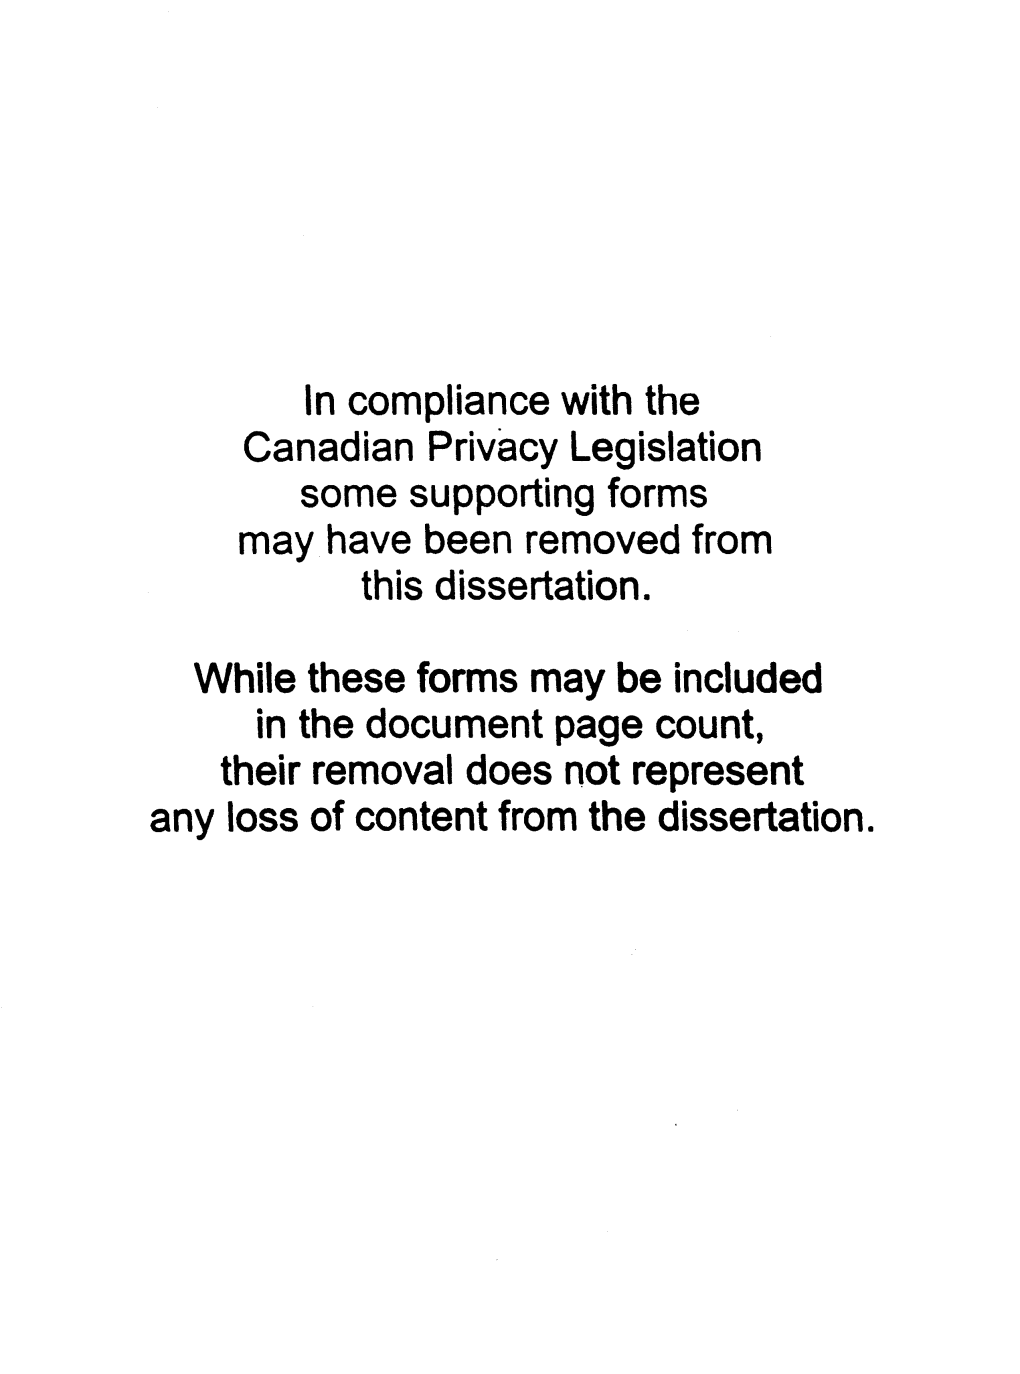 Ln Compliance with the Canadian Privacy Legislation Sorne Supporting Forms May Have Been Removed Trom This Dissertation